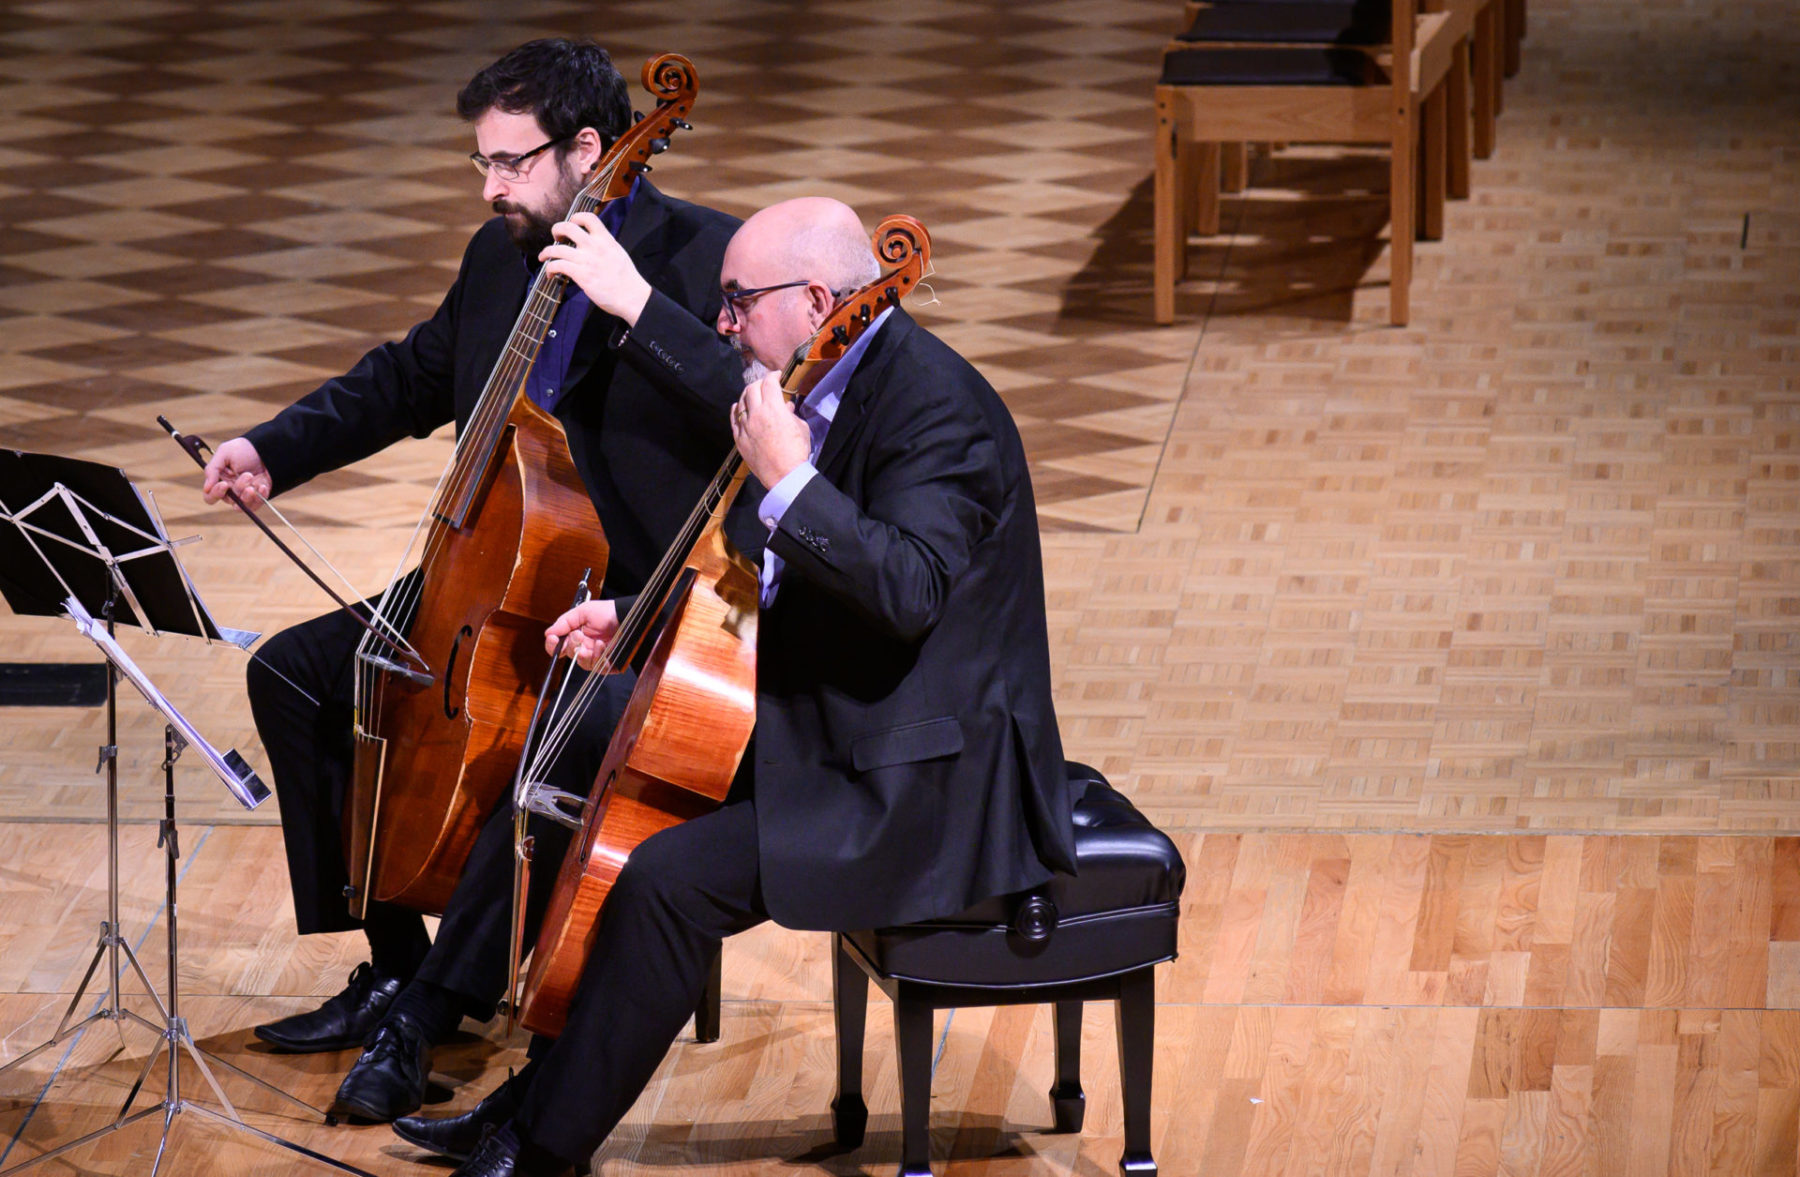 Fretwork, Purcell & Nyman: Music After Awhile, Modulus 2019